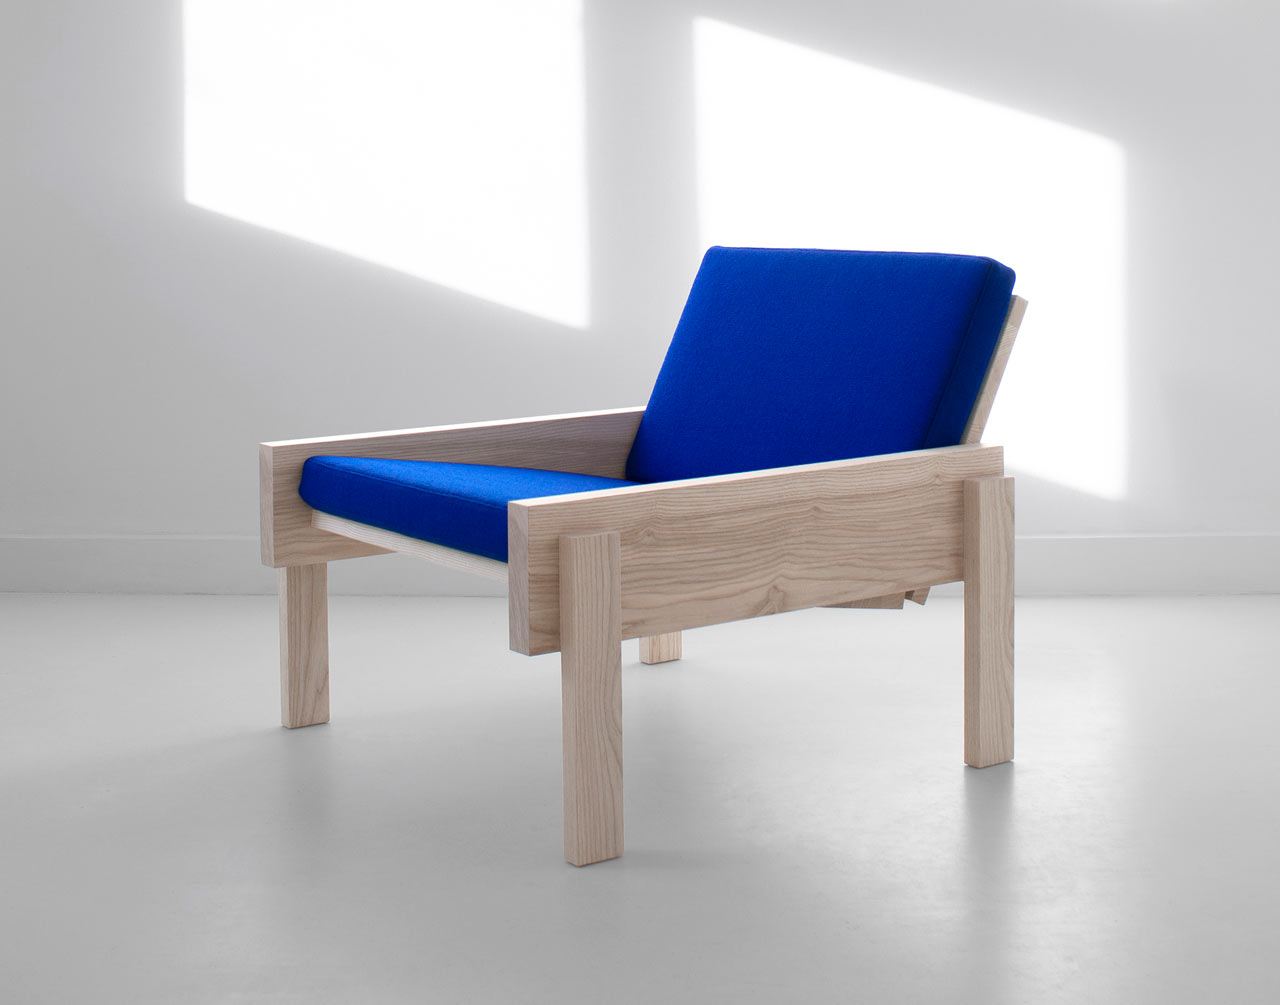 The Simple Solid Chair by Thijmen van der Steen